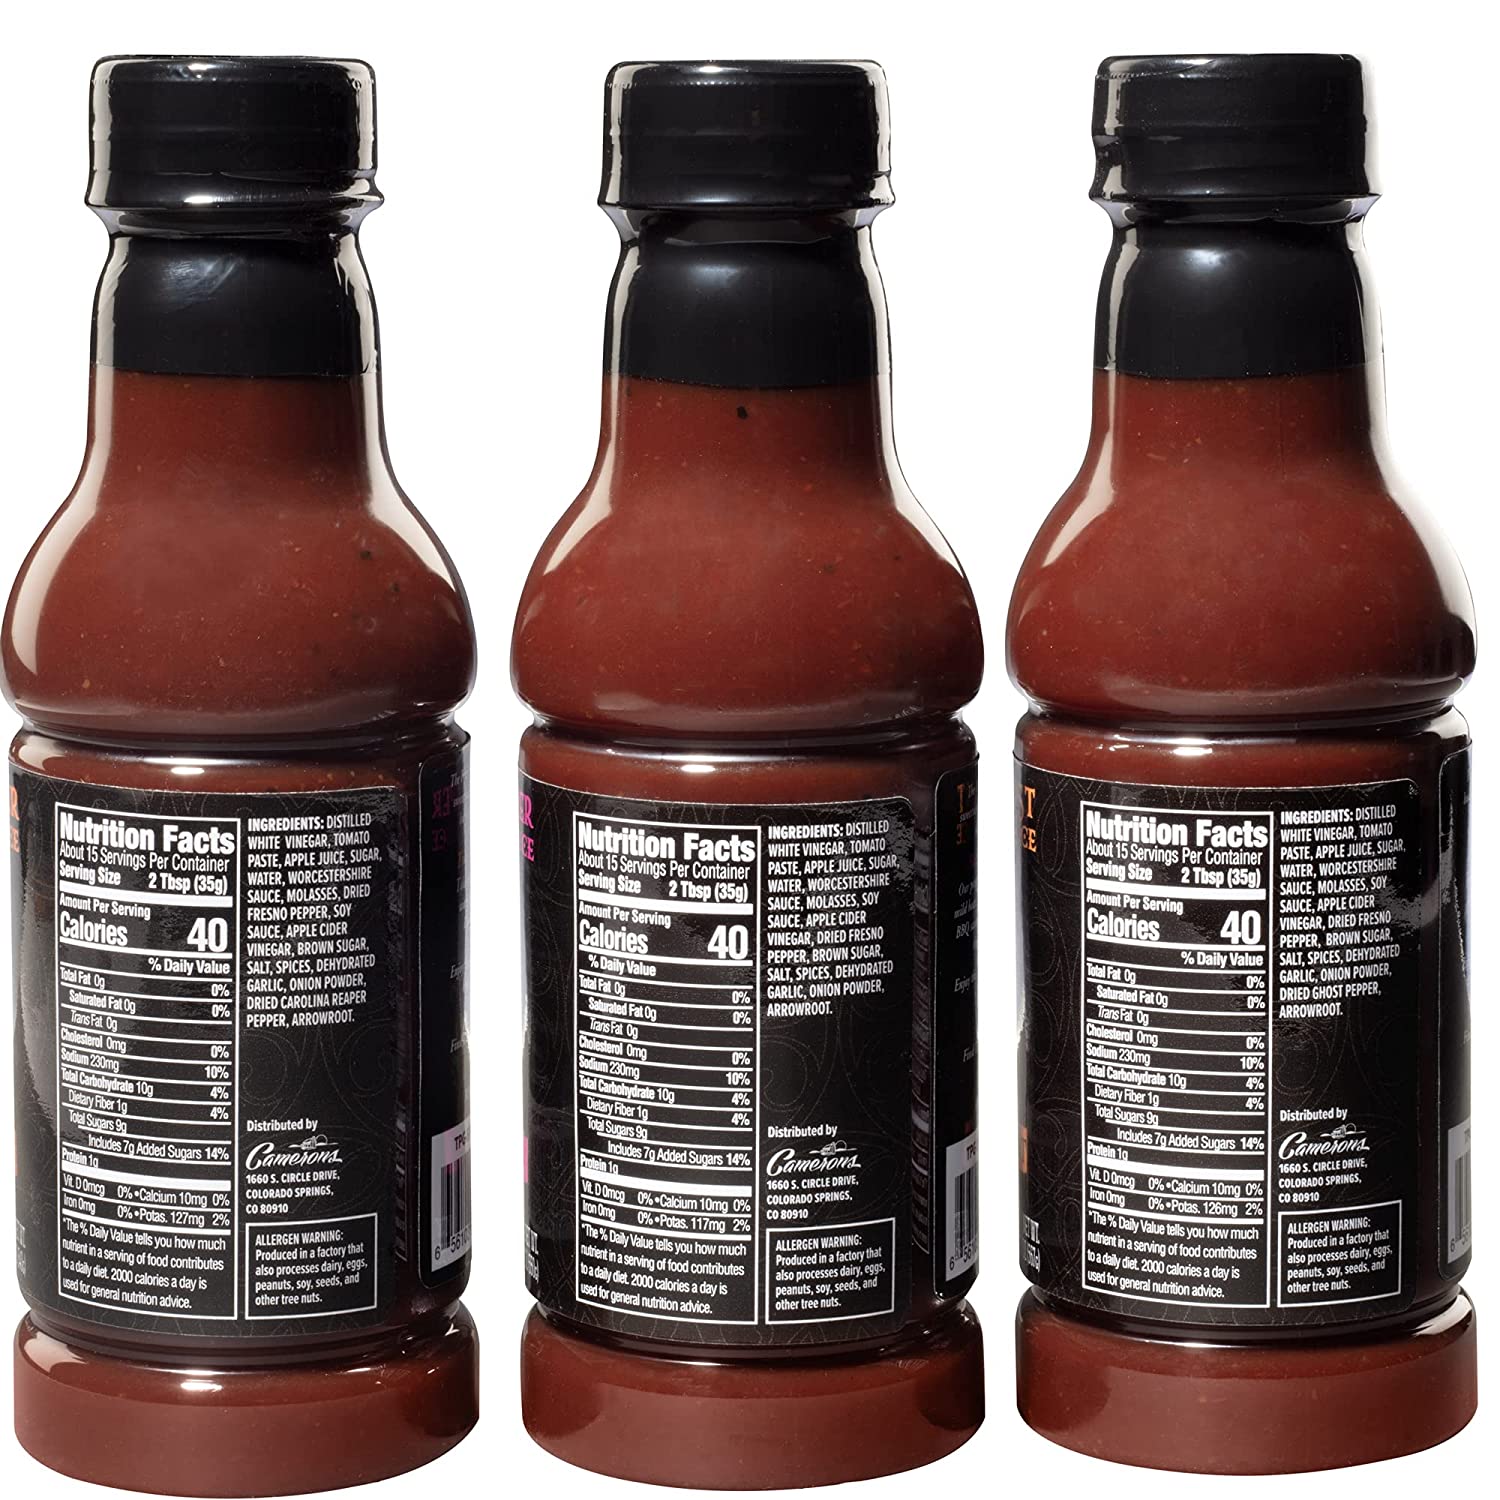 Tony Pigg's Kick'n Hot BBQ Sauce Gift Set - (3-19oz Bottles - Fresno Reaper, Ghost, Creeper Flavors) - Hand-Crafted Spicy Barbecue Sauce made w real hot peppers and Nothing Artificial - image 2 of 5